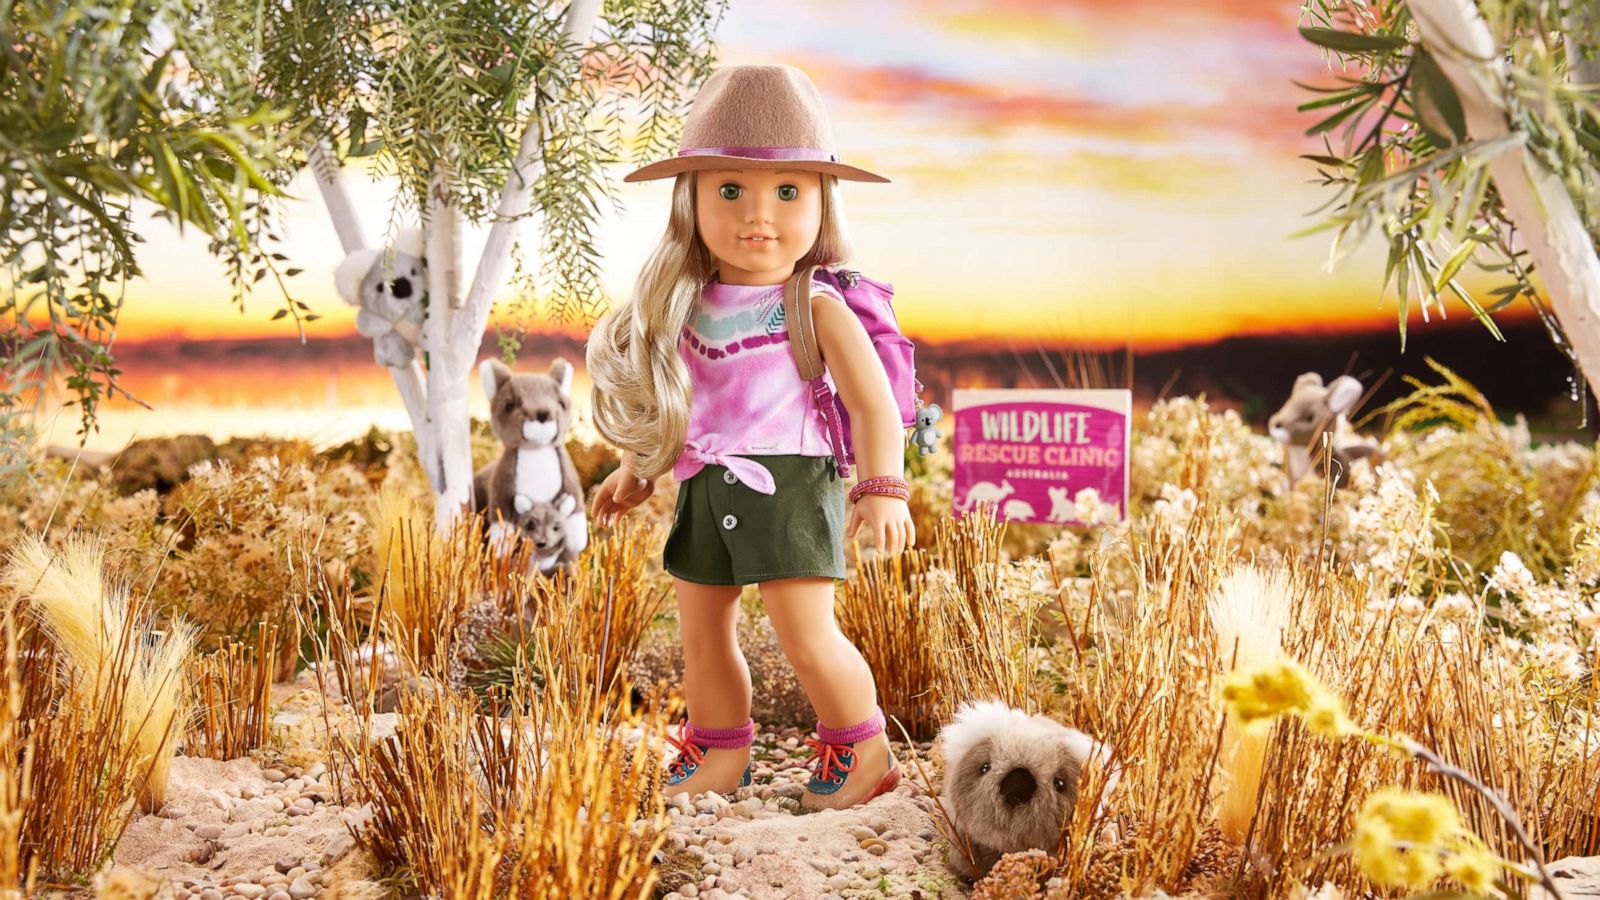 American Girl's 2021 doll of the year is wildlife conservationist